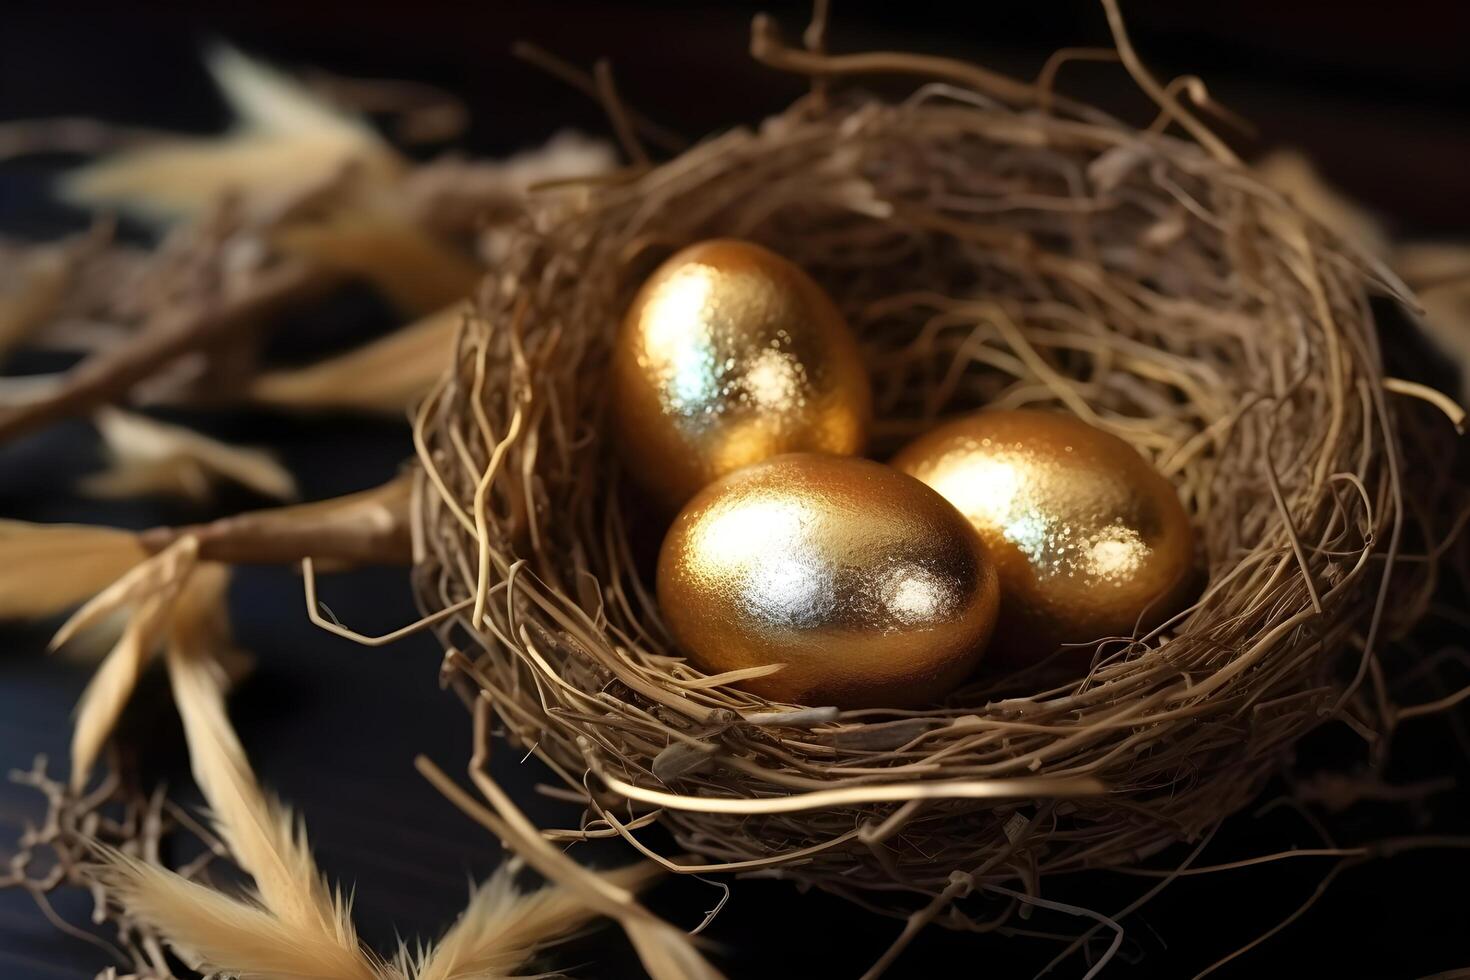 The Golden Egg in the Nest, generated photo